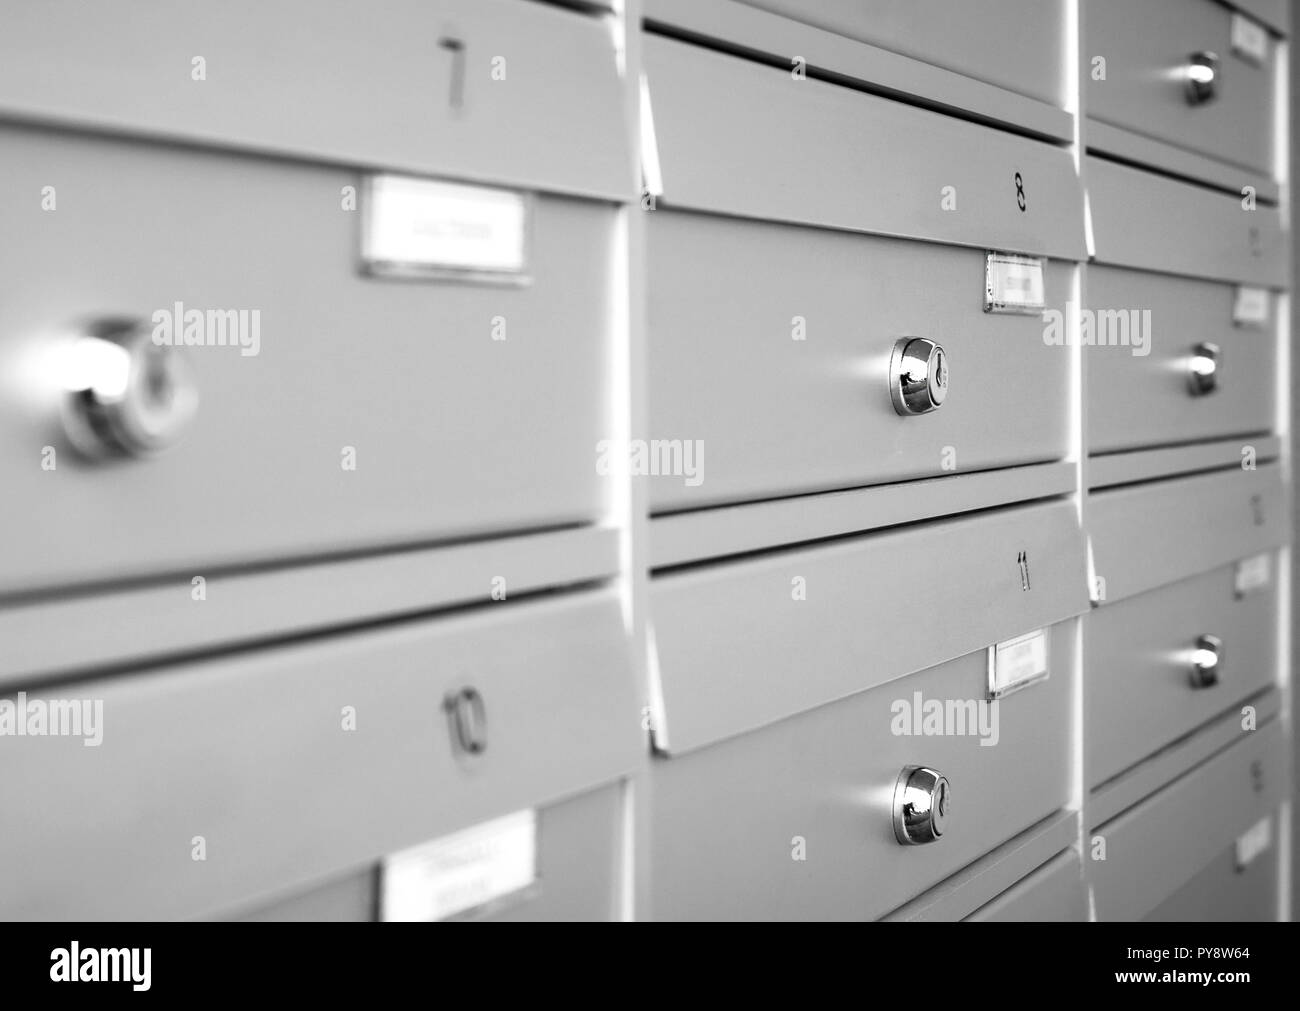 Aluminum mail boxes. Ideal for concepts such as safety and security, business communication and more. Shallow DOF. Stock Photo